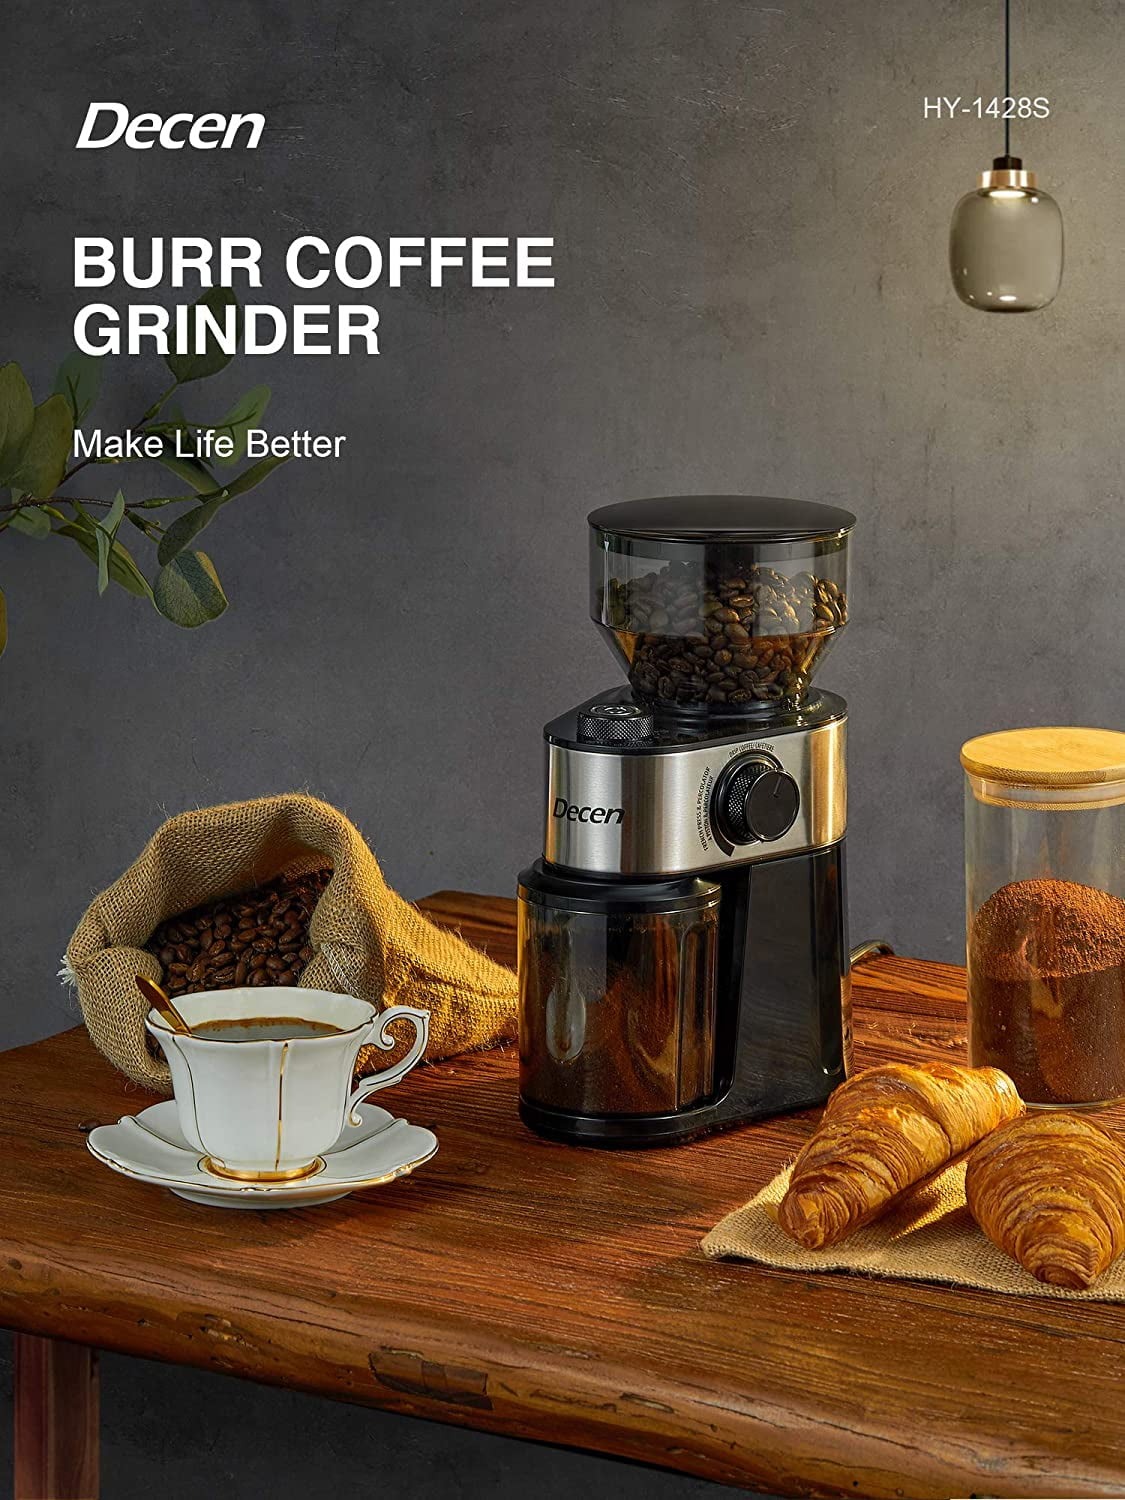 Electric Burr Coffee Grinder, FOHERE Coffee Bean Grinder with 18